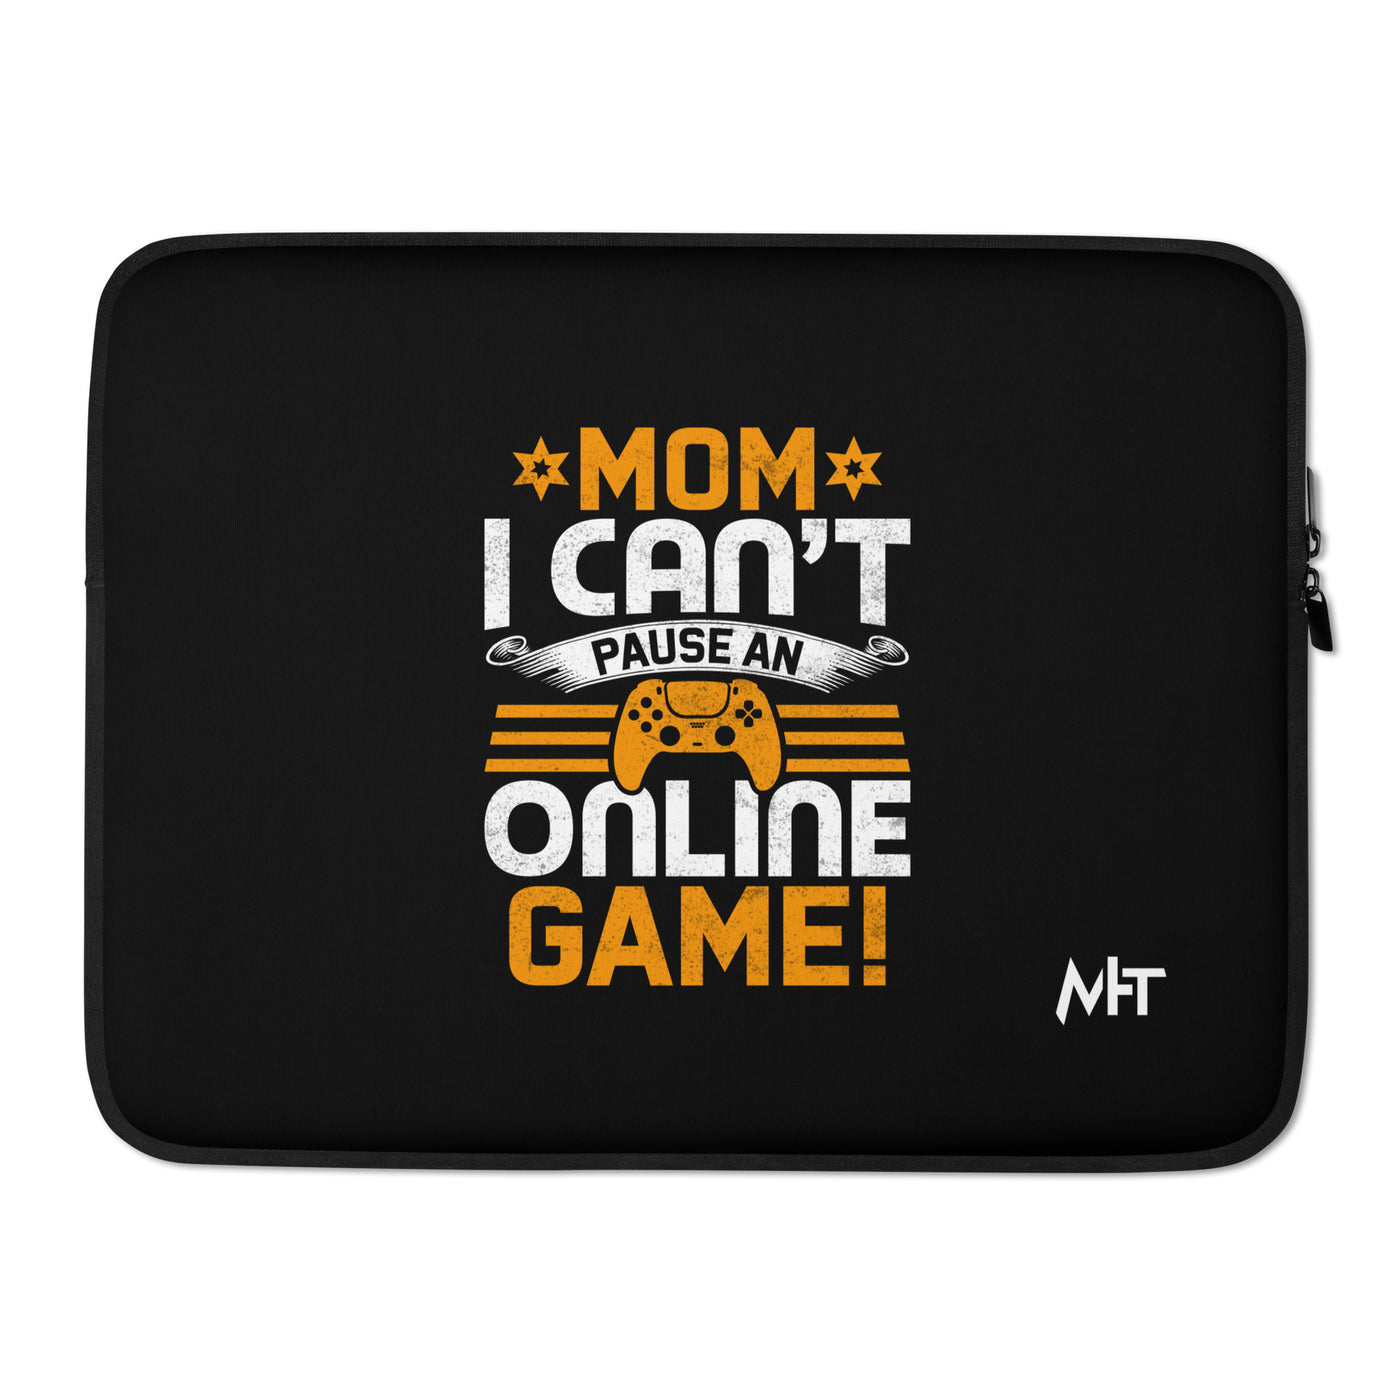 *MOM*! I can't Pause an Online Game - Laptop Sleeve